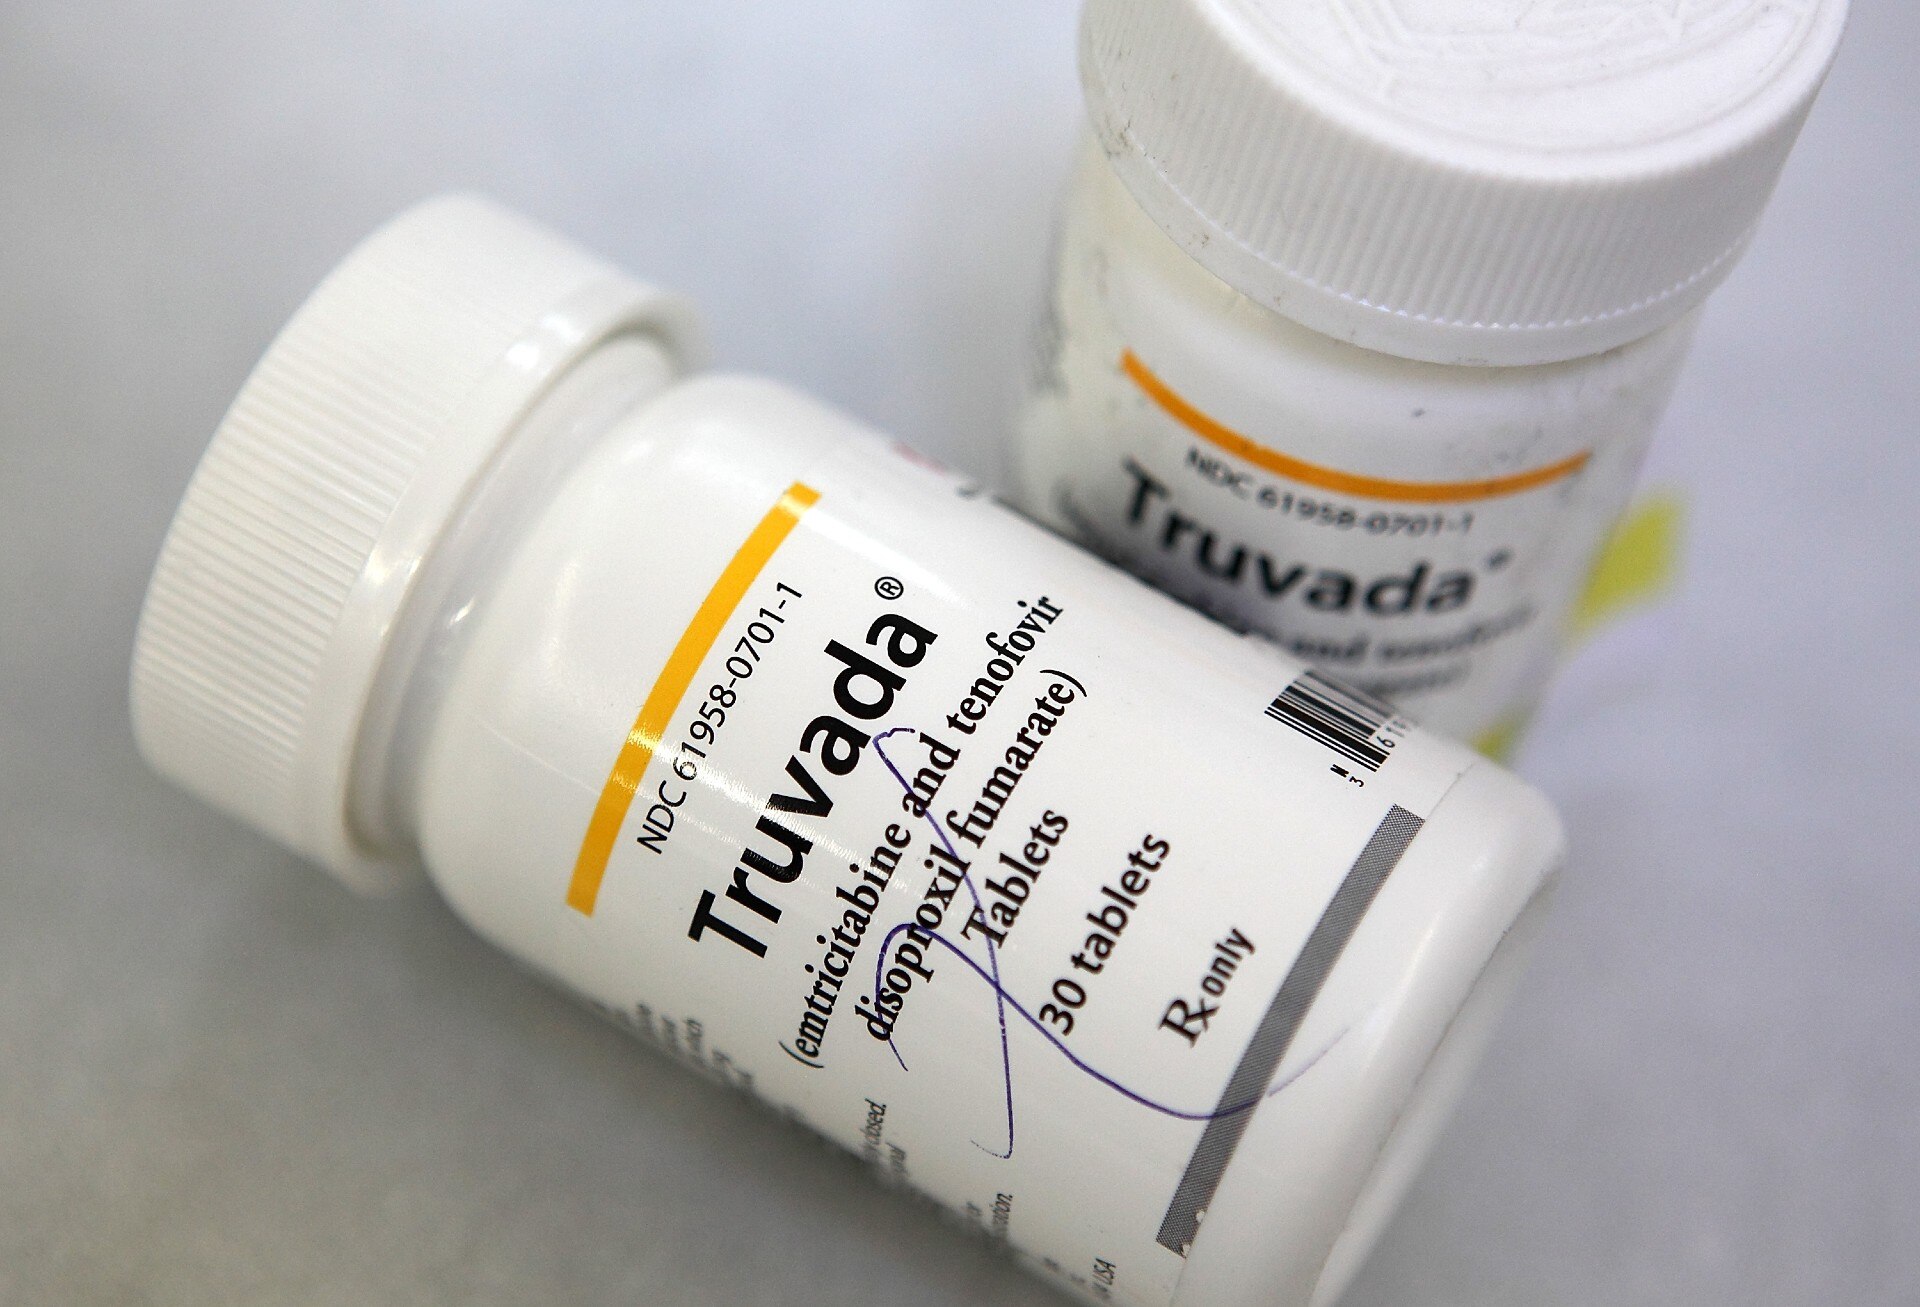 Two medication bottles with Truvada on the label